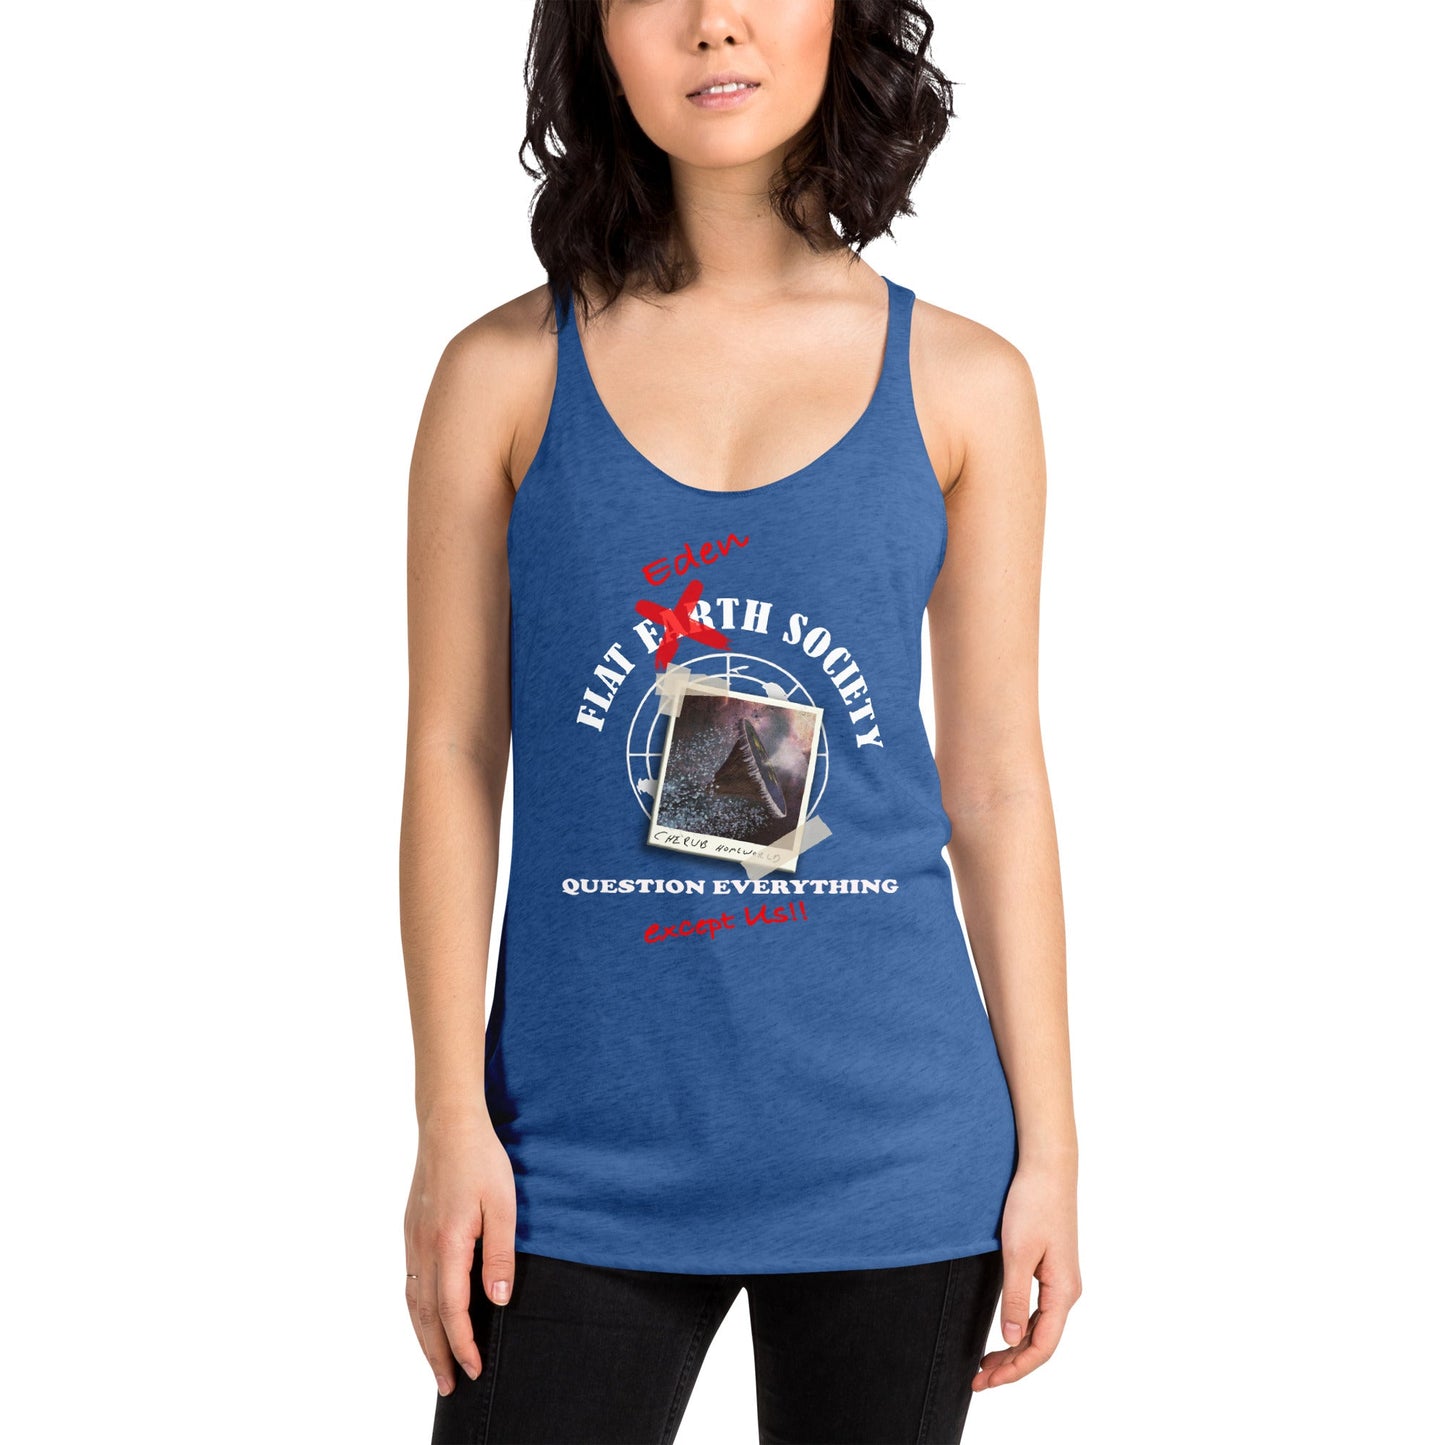 Women's Racerback Tank | Intergalactic Space Force 2 | Flat Eden Society - Spectral Ink Shop - Shirts & Tops -2753985_6671